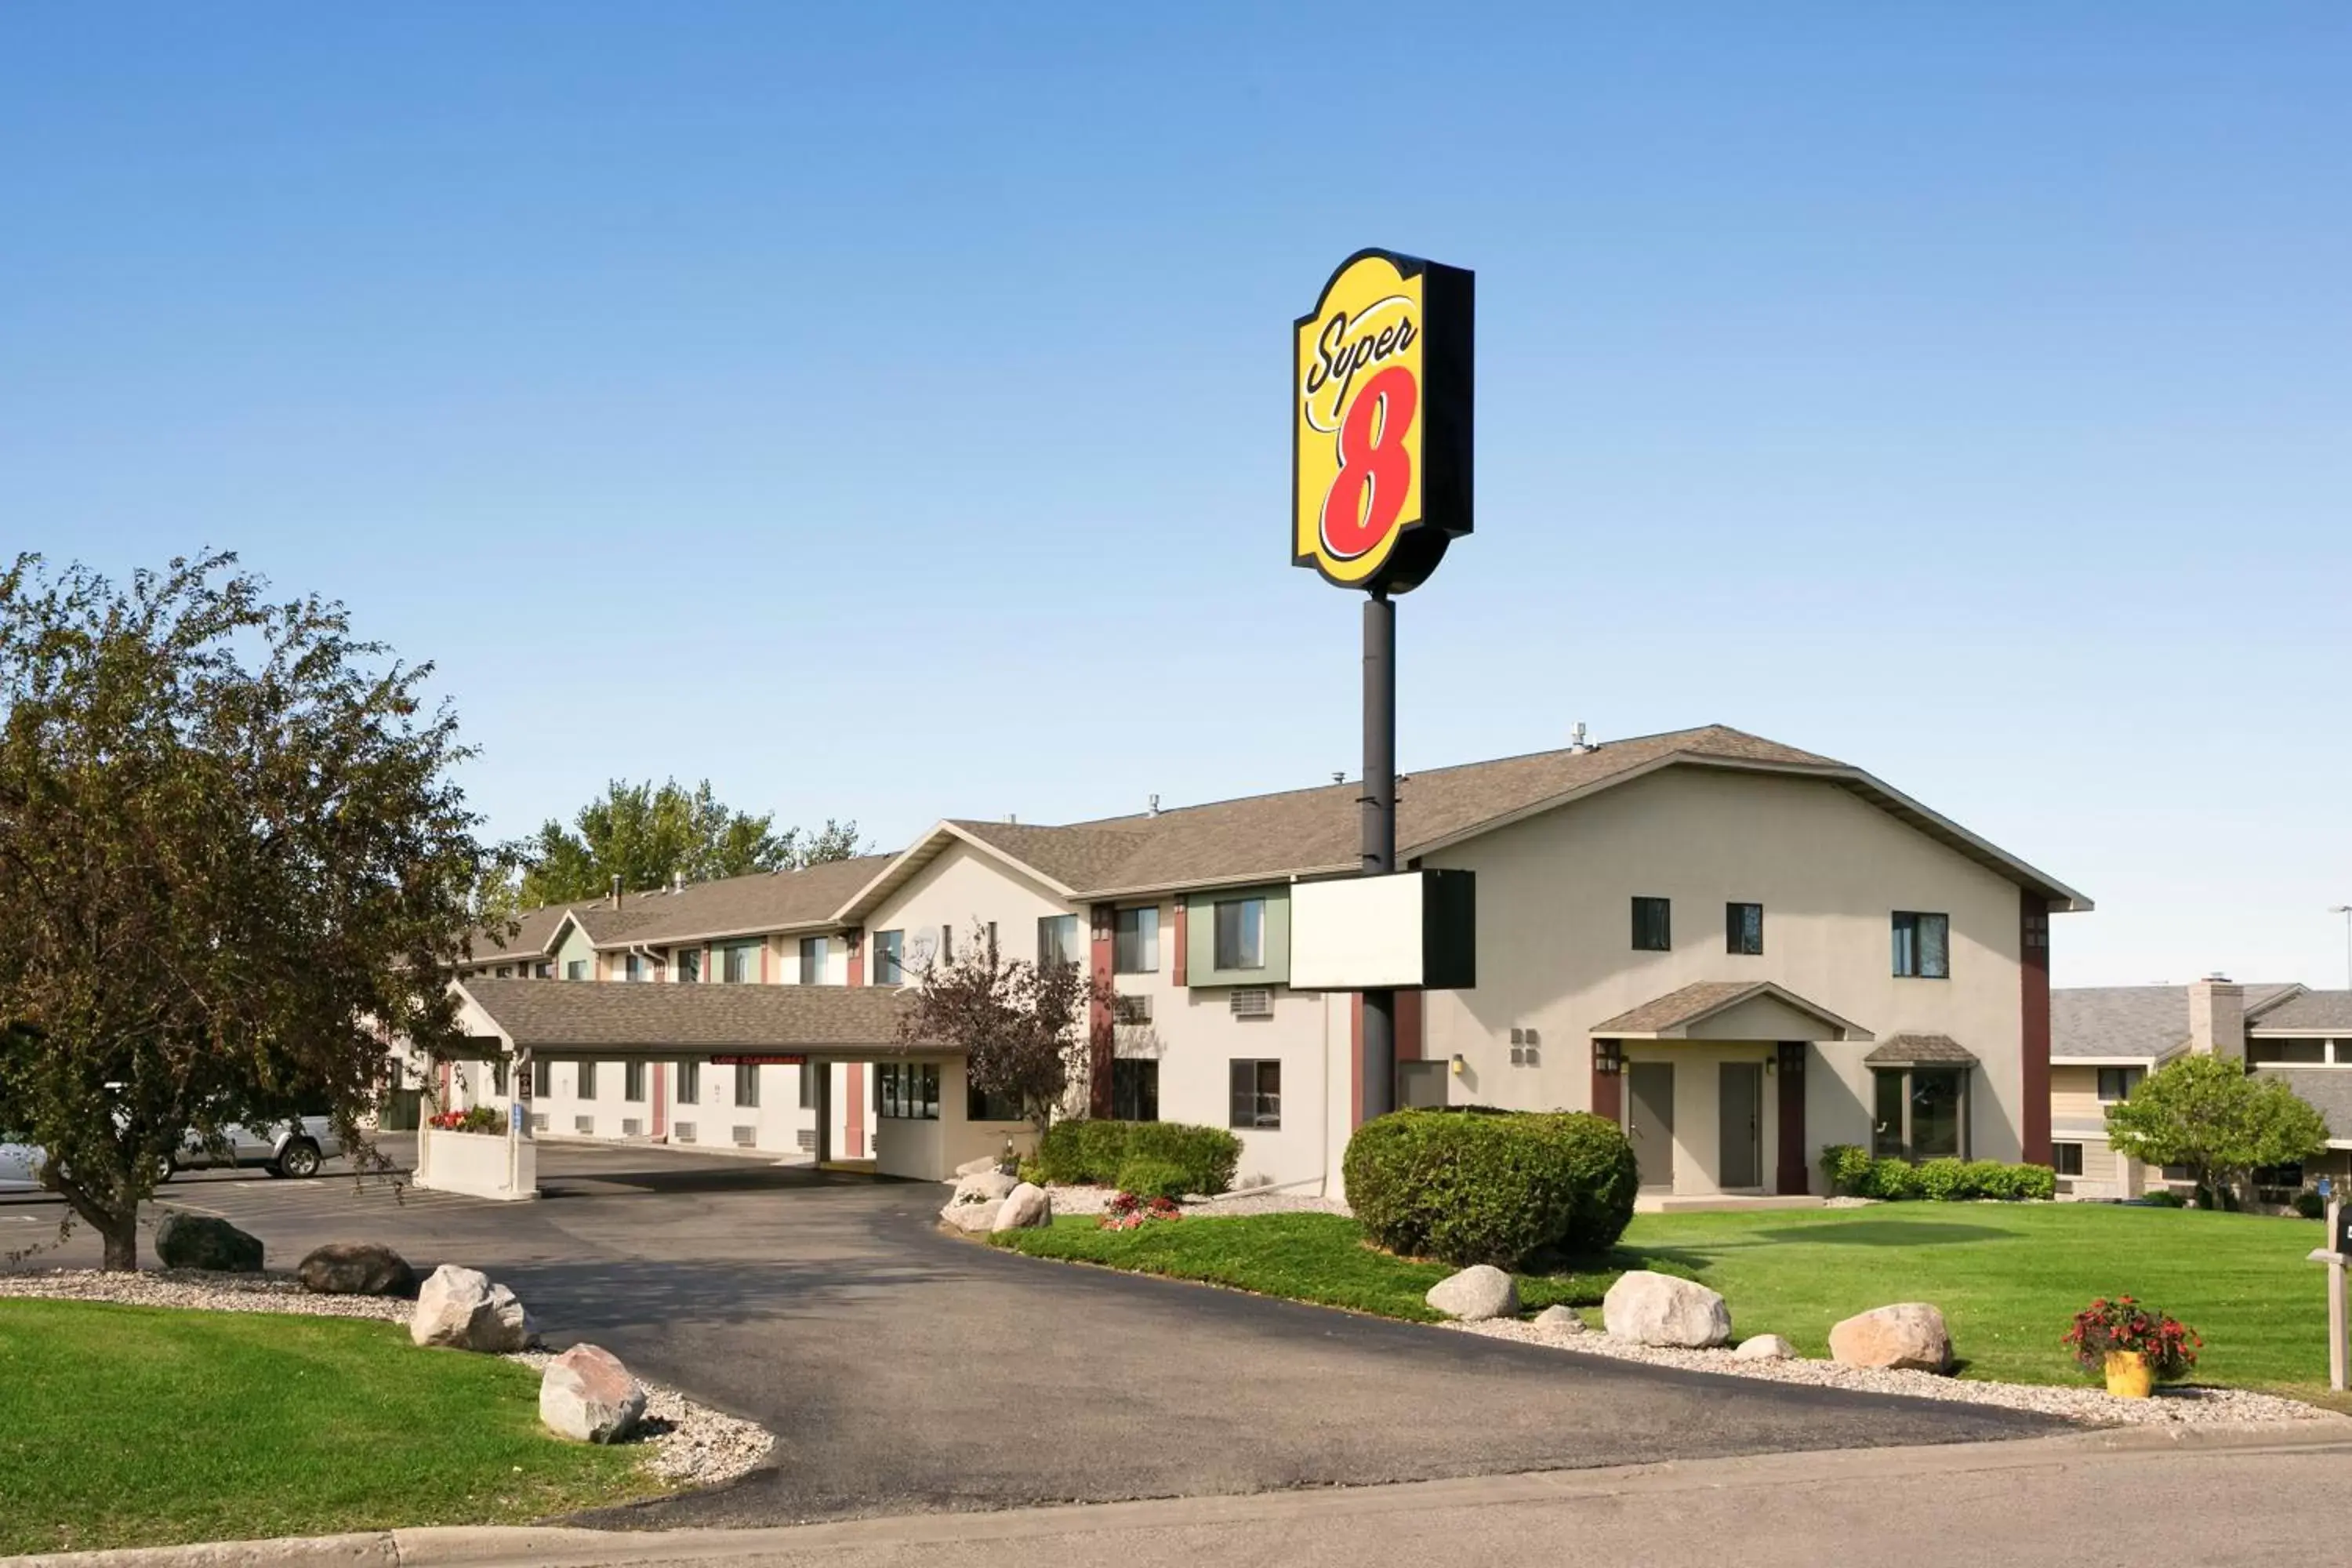 Property Building in Super 8 by Wyndham Alexandria MN